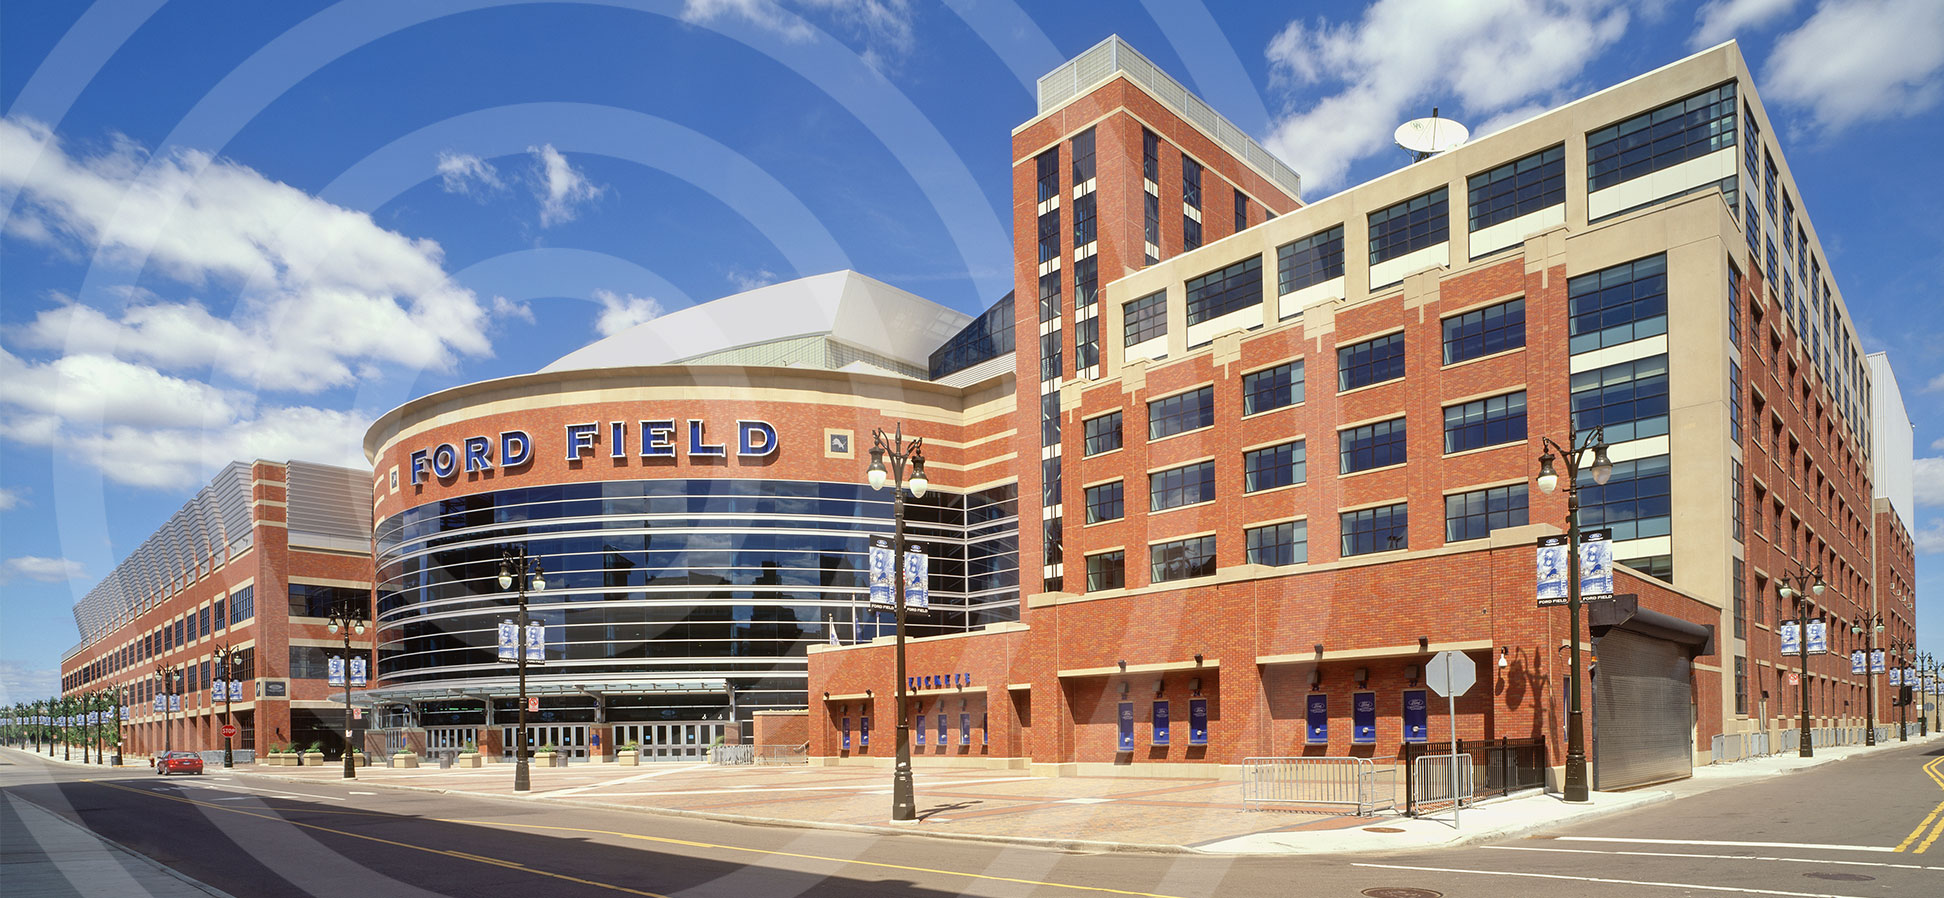 Lions Parking: Your Guide to Ford Field Parking